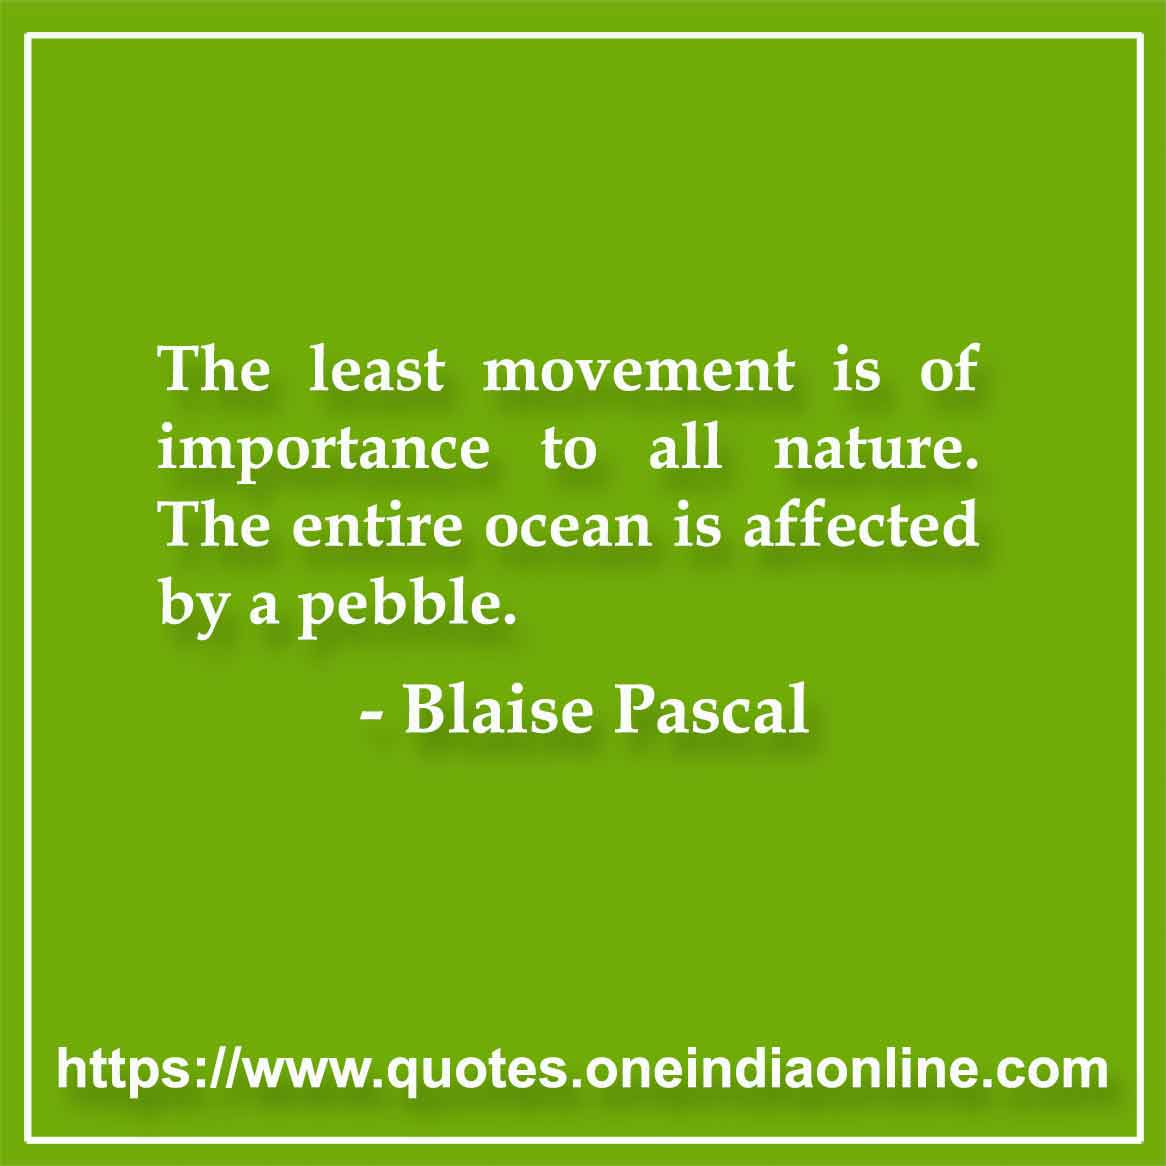 The least movement is of importance to all nature. The entire ocean is affected by a pebble. 

-  by Blaise Pascal